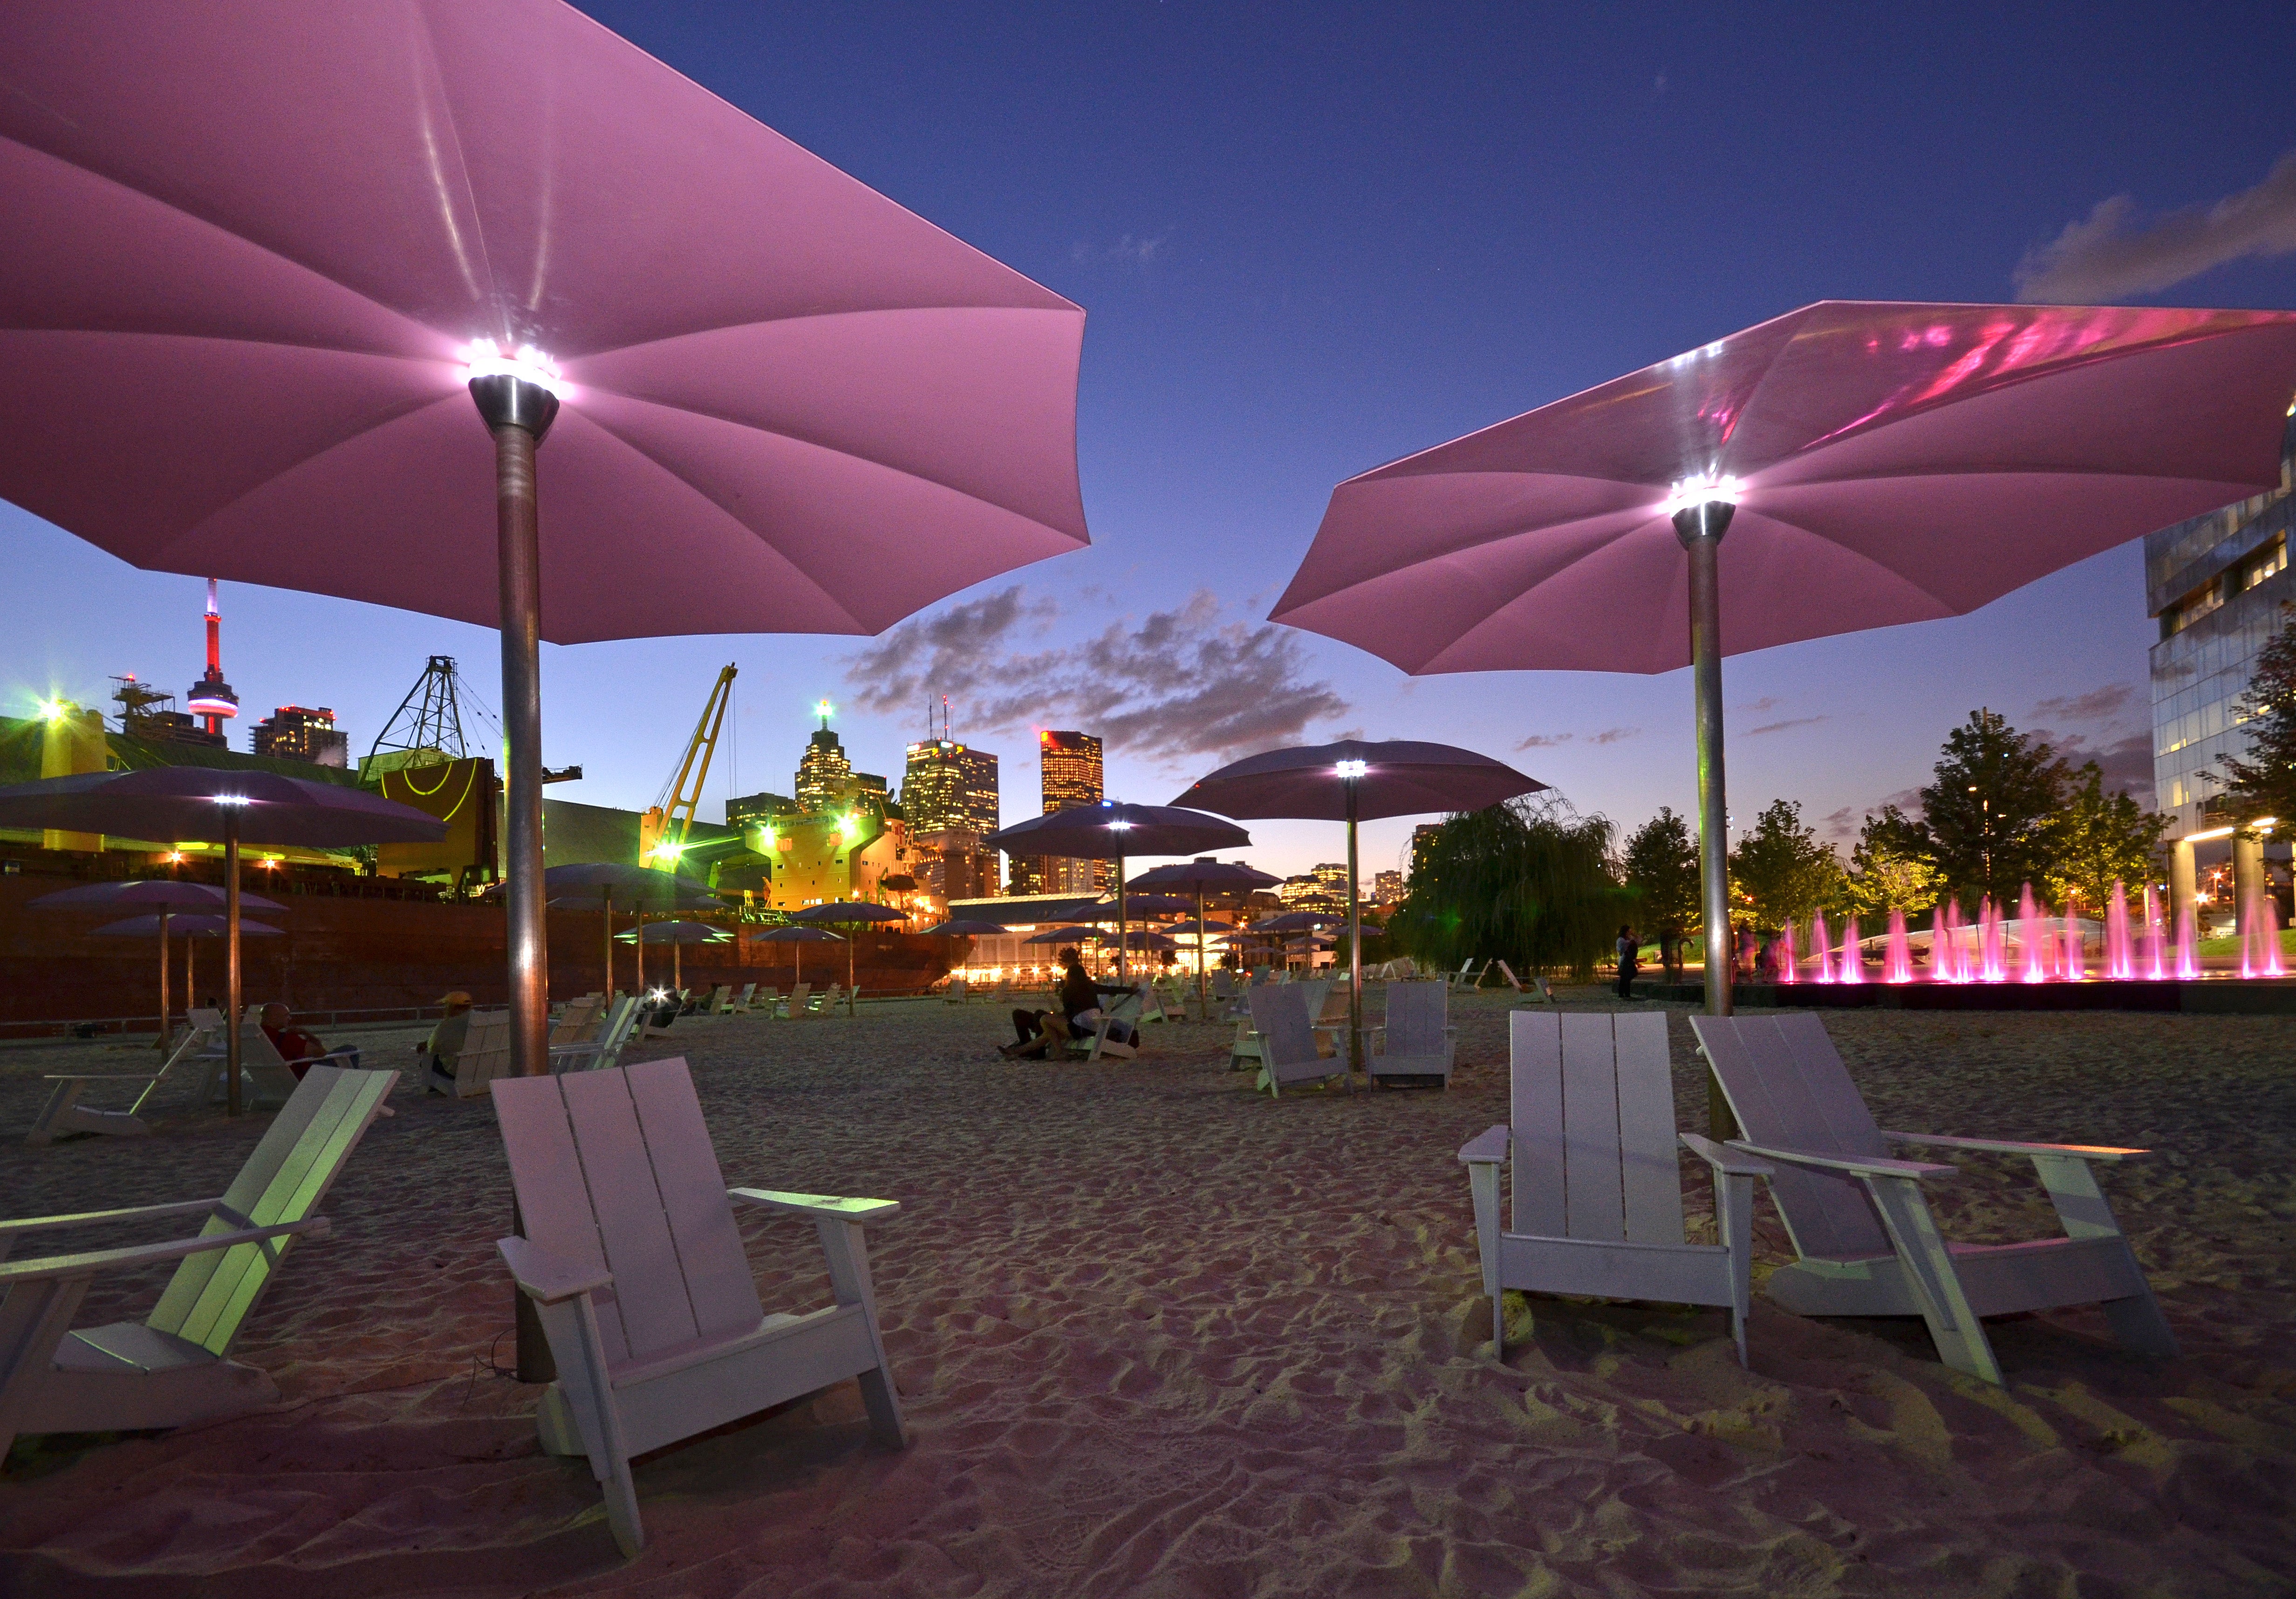 Canada's Sugar Beach in East Bayfront at night.